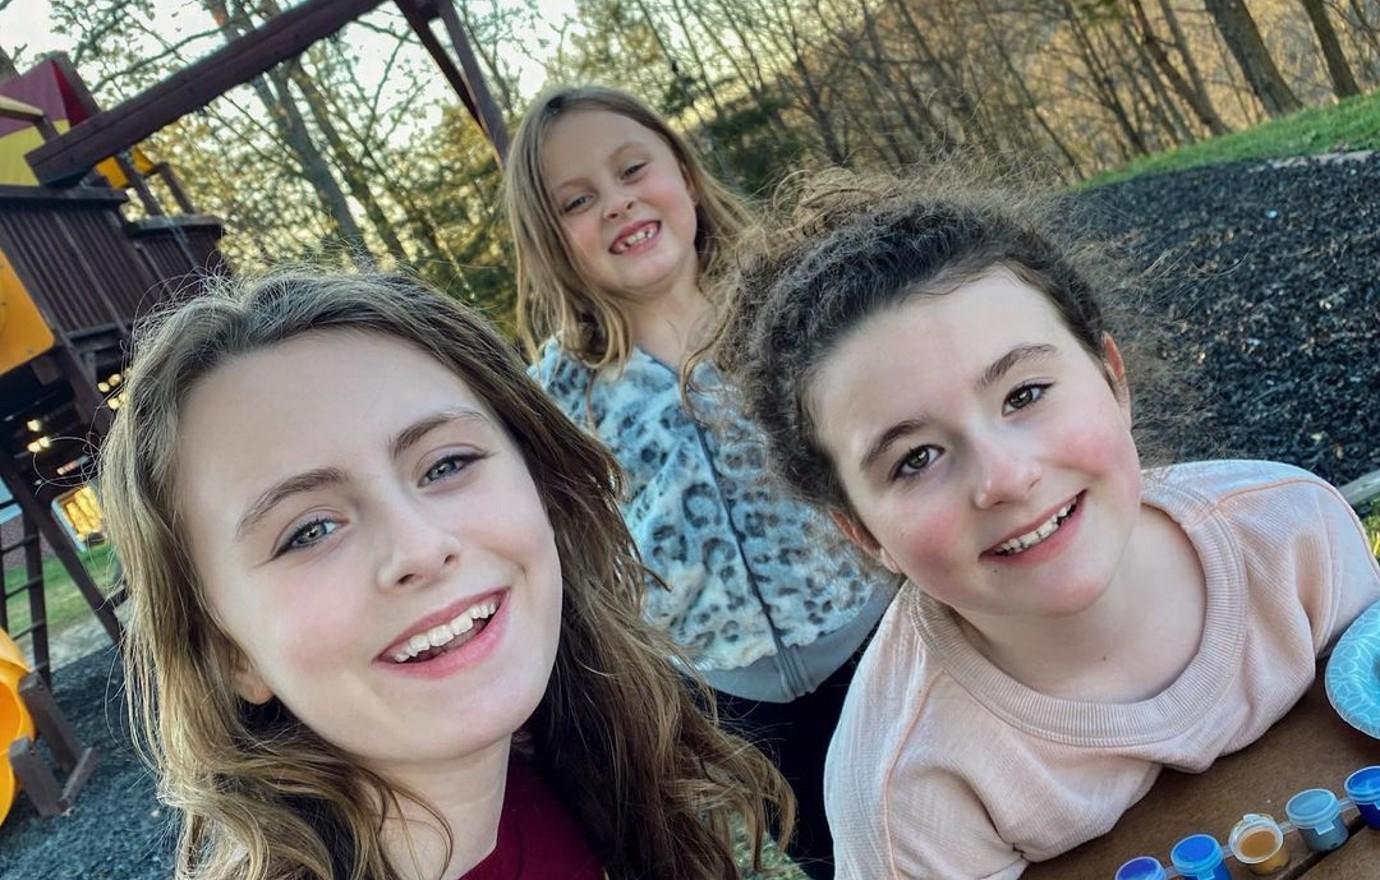 Leah Messer's 5-Year-Old Twins Don Spandex Short Shorts, Red Lipstick: The  Girls Look 'Inappropriate,' Says Psychologist